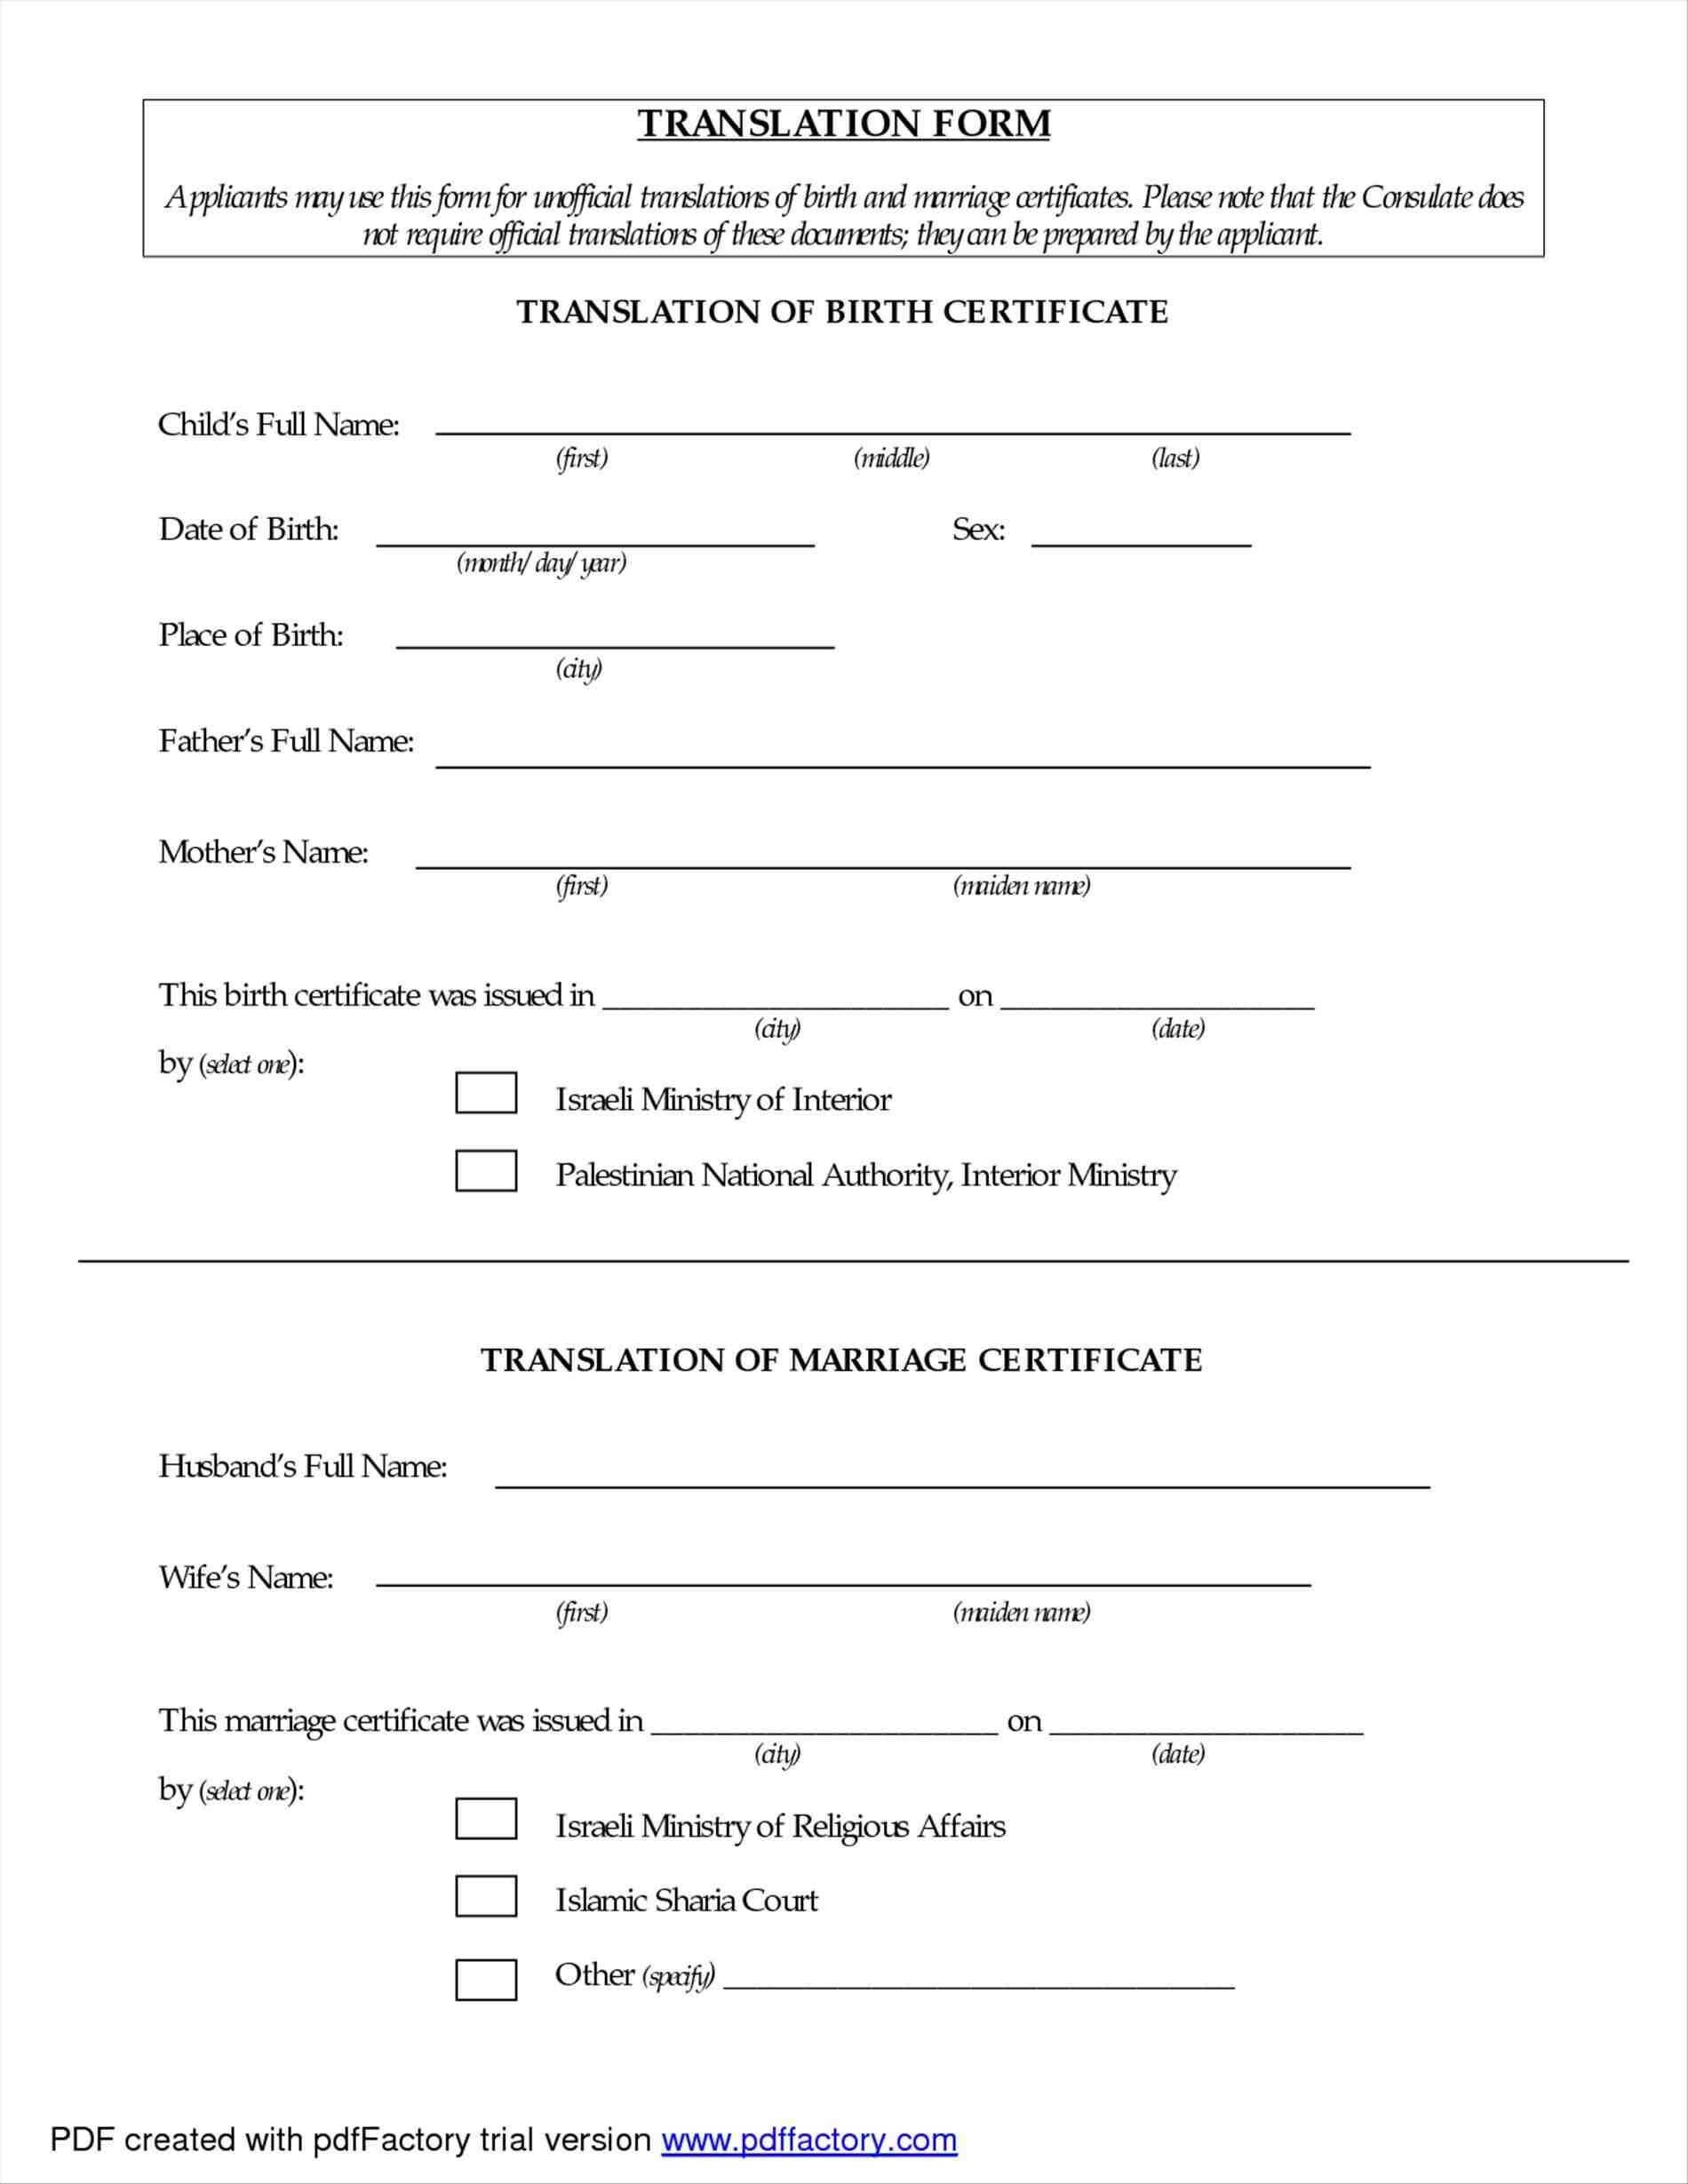 021 Large Certificate Of Marriage Template Beautiful Ideas Pertaining To Mexican Marriage Certificate Translation Template